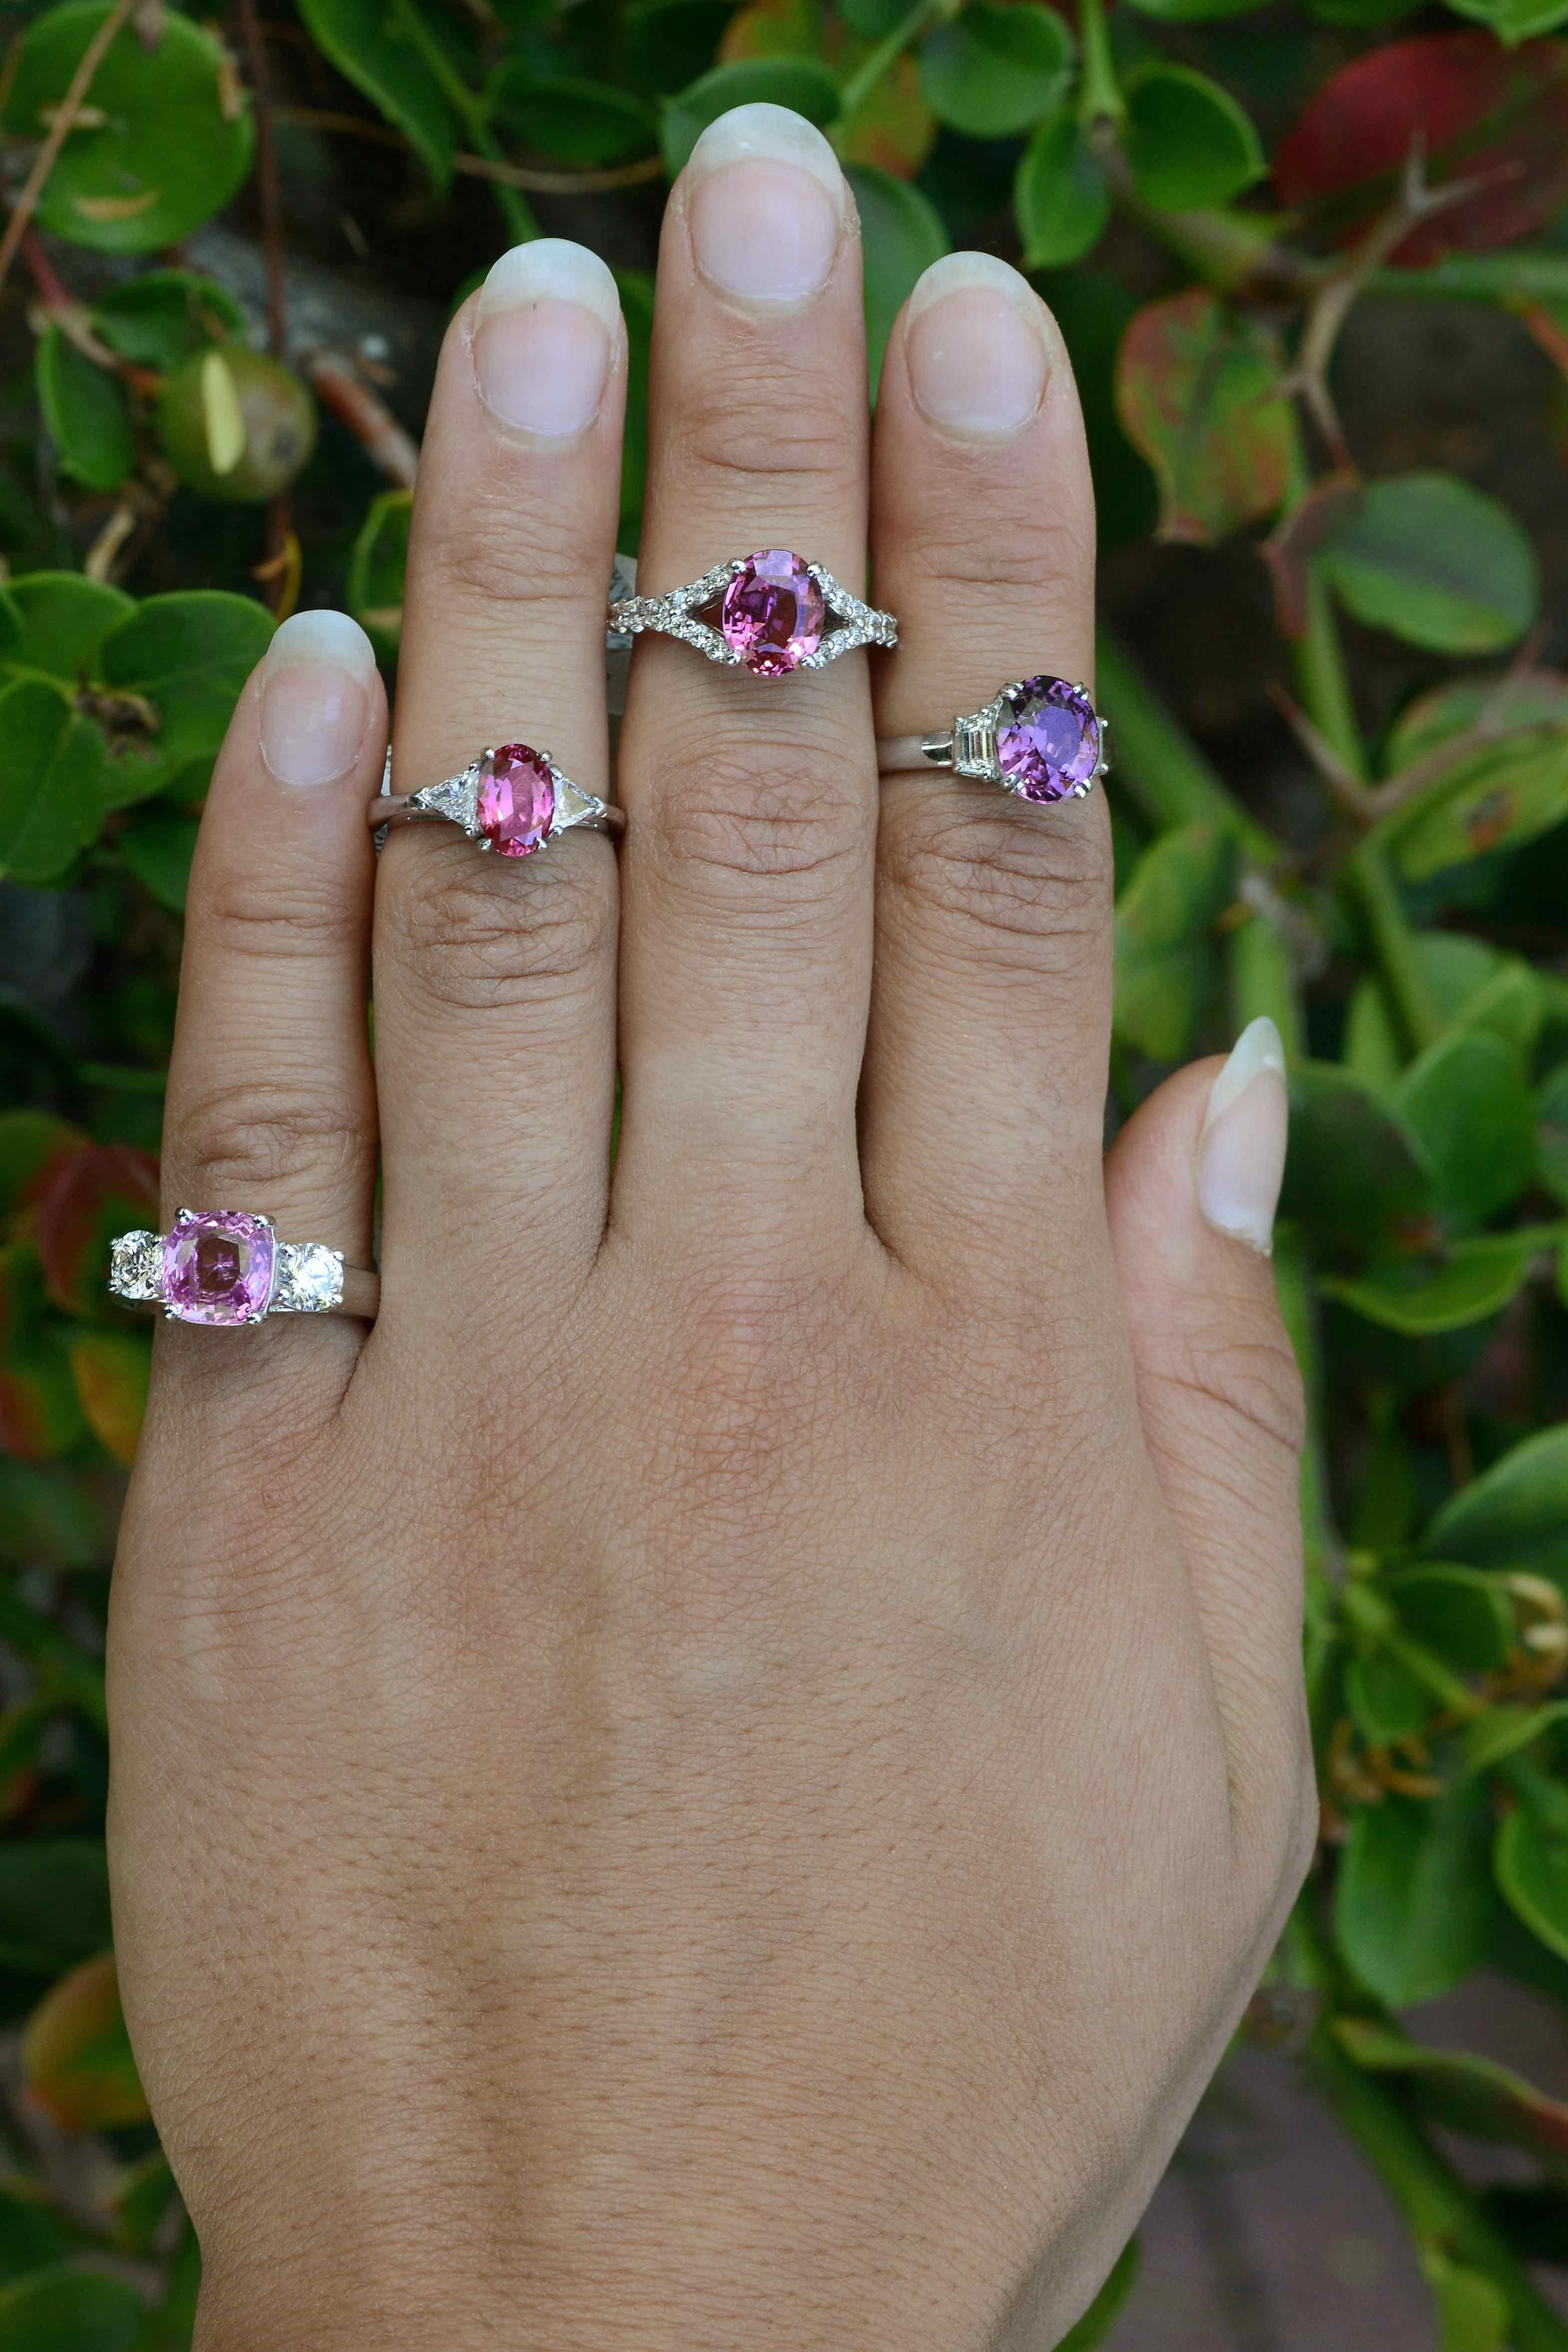 A most elegant natural pink sapphire 3 stone engagement ring. The ever-popular trinity design centered by a vivid, intense bubble gum pink sapphire, the oval cut bursting with a a most vibrant, shimmering shade with captivating brilliance. A vintage